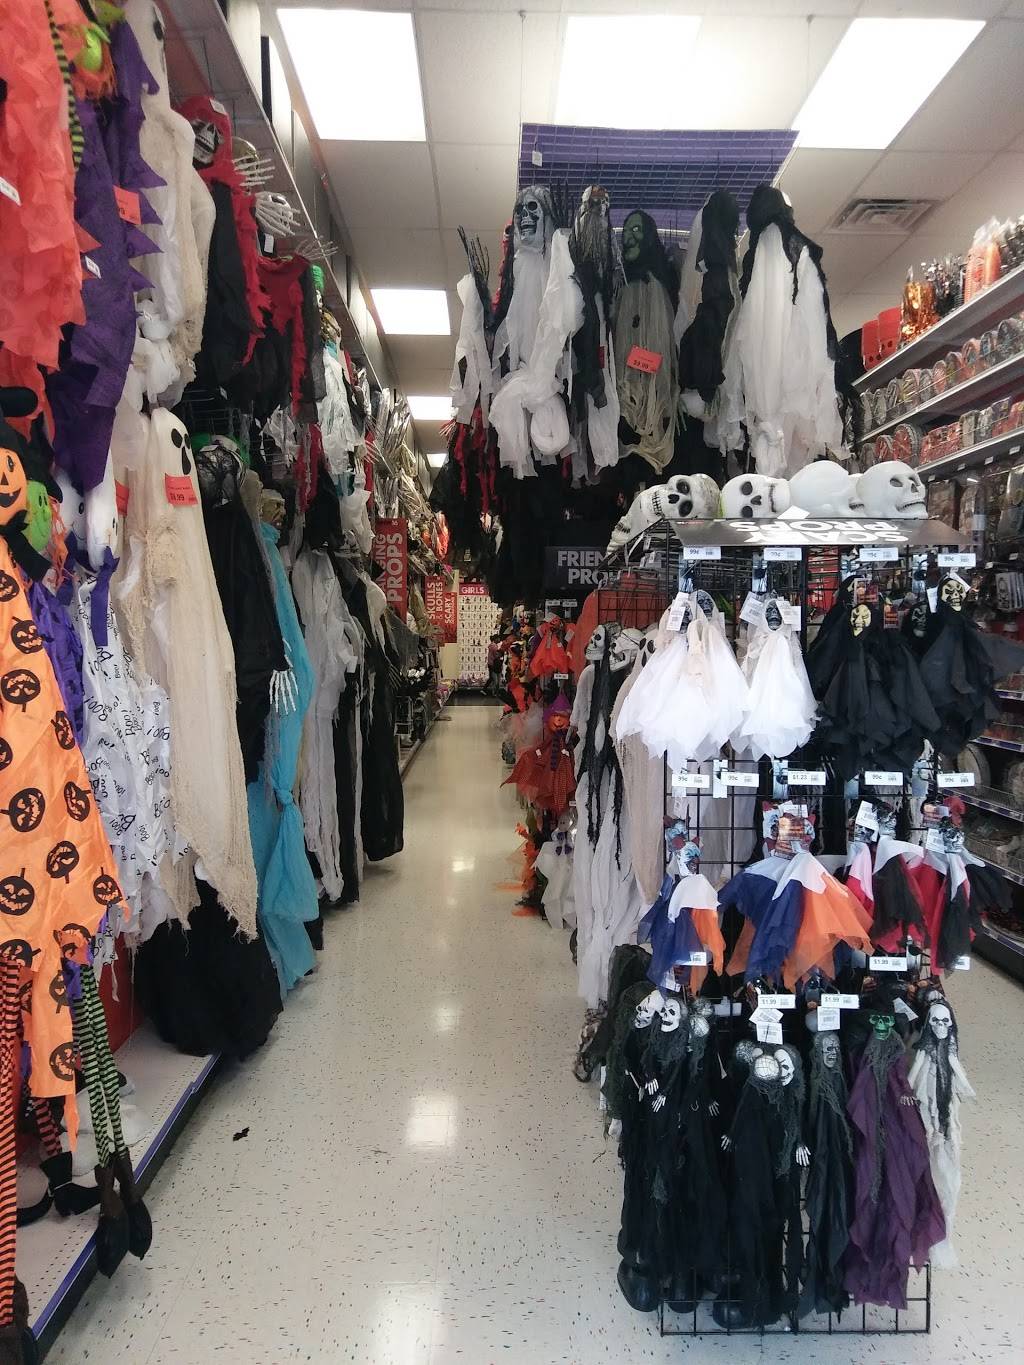 Party City | Across from Total Wine, 566 S Stratford Rd, Winston-Salem, NC 27103 | Phone: (336) 725-1130